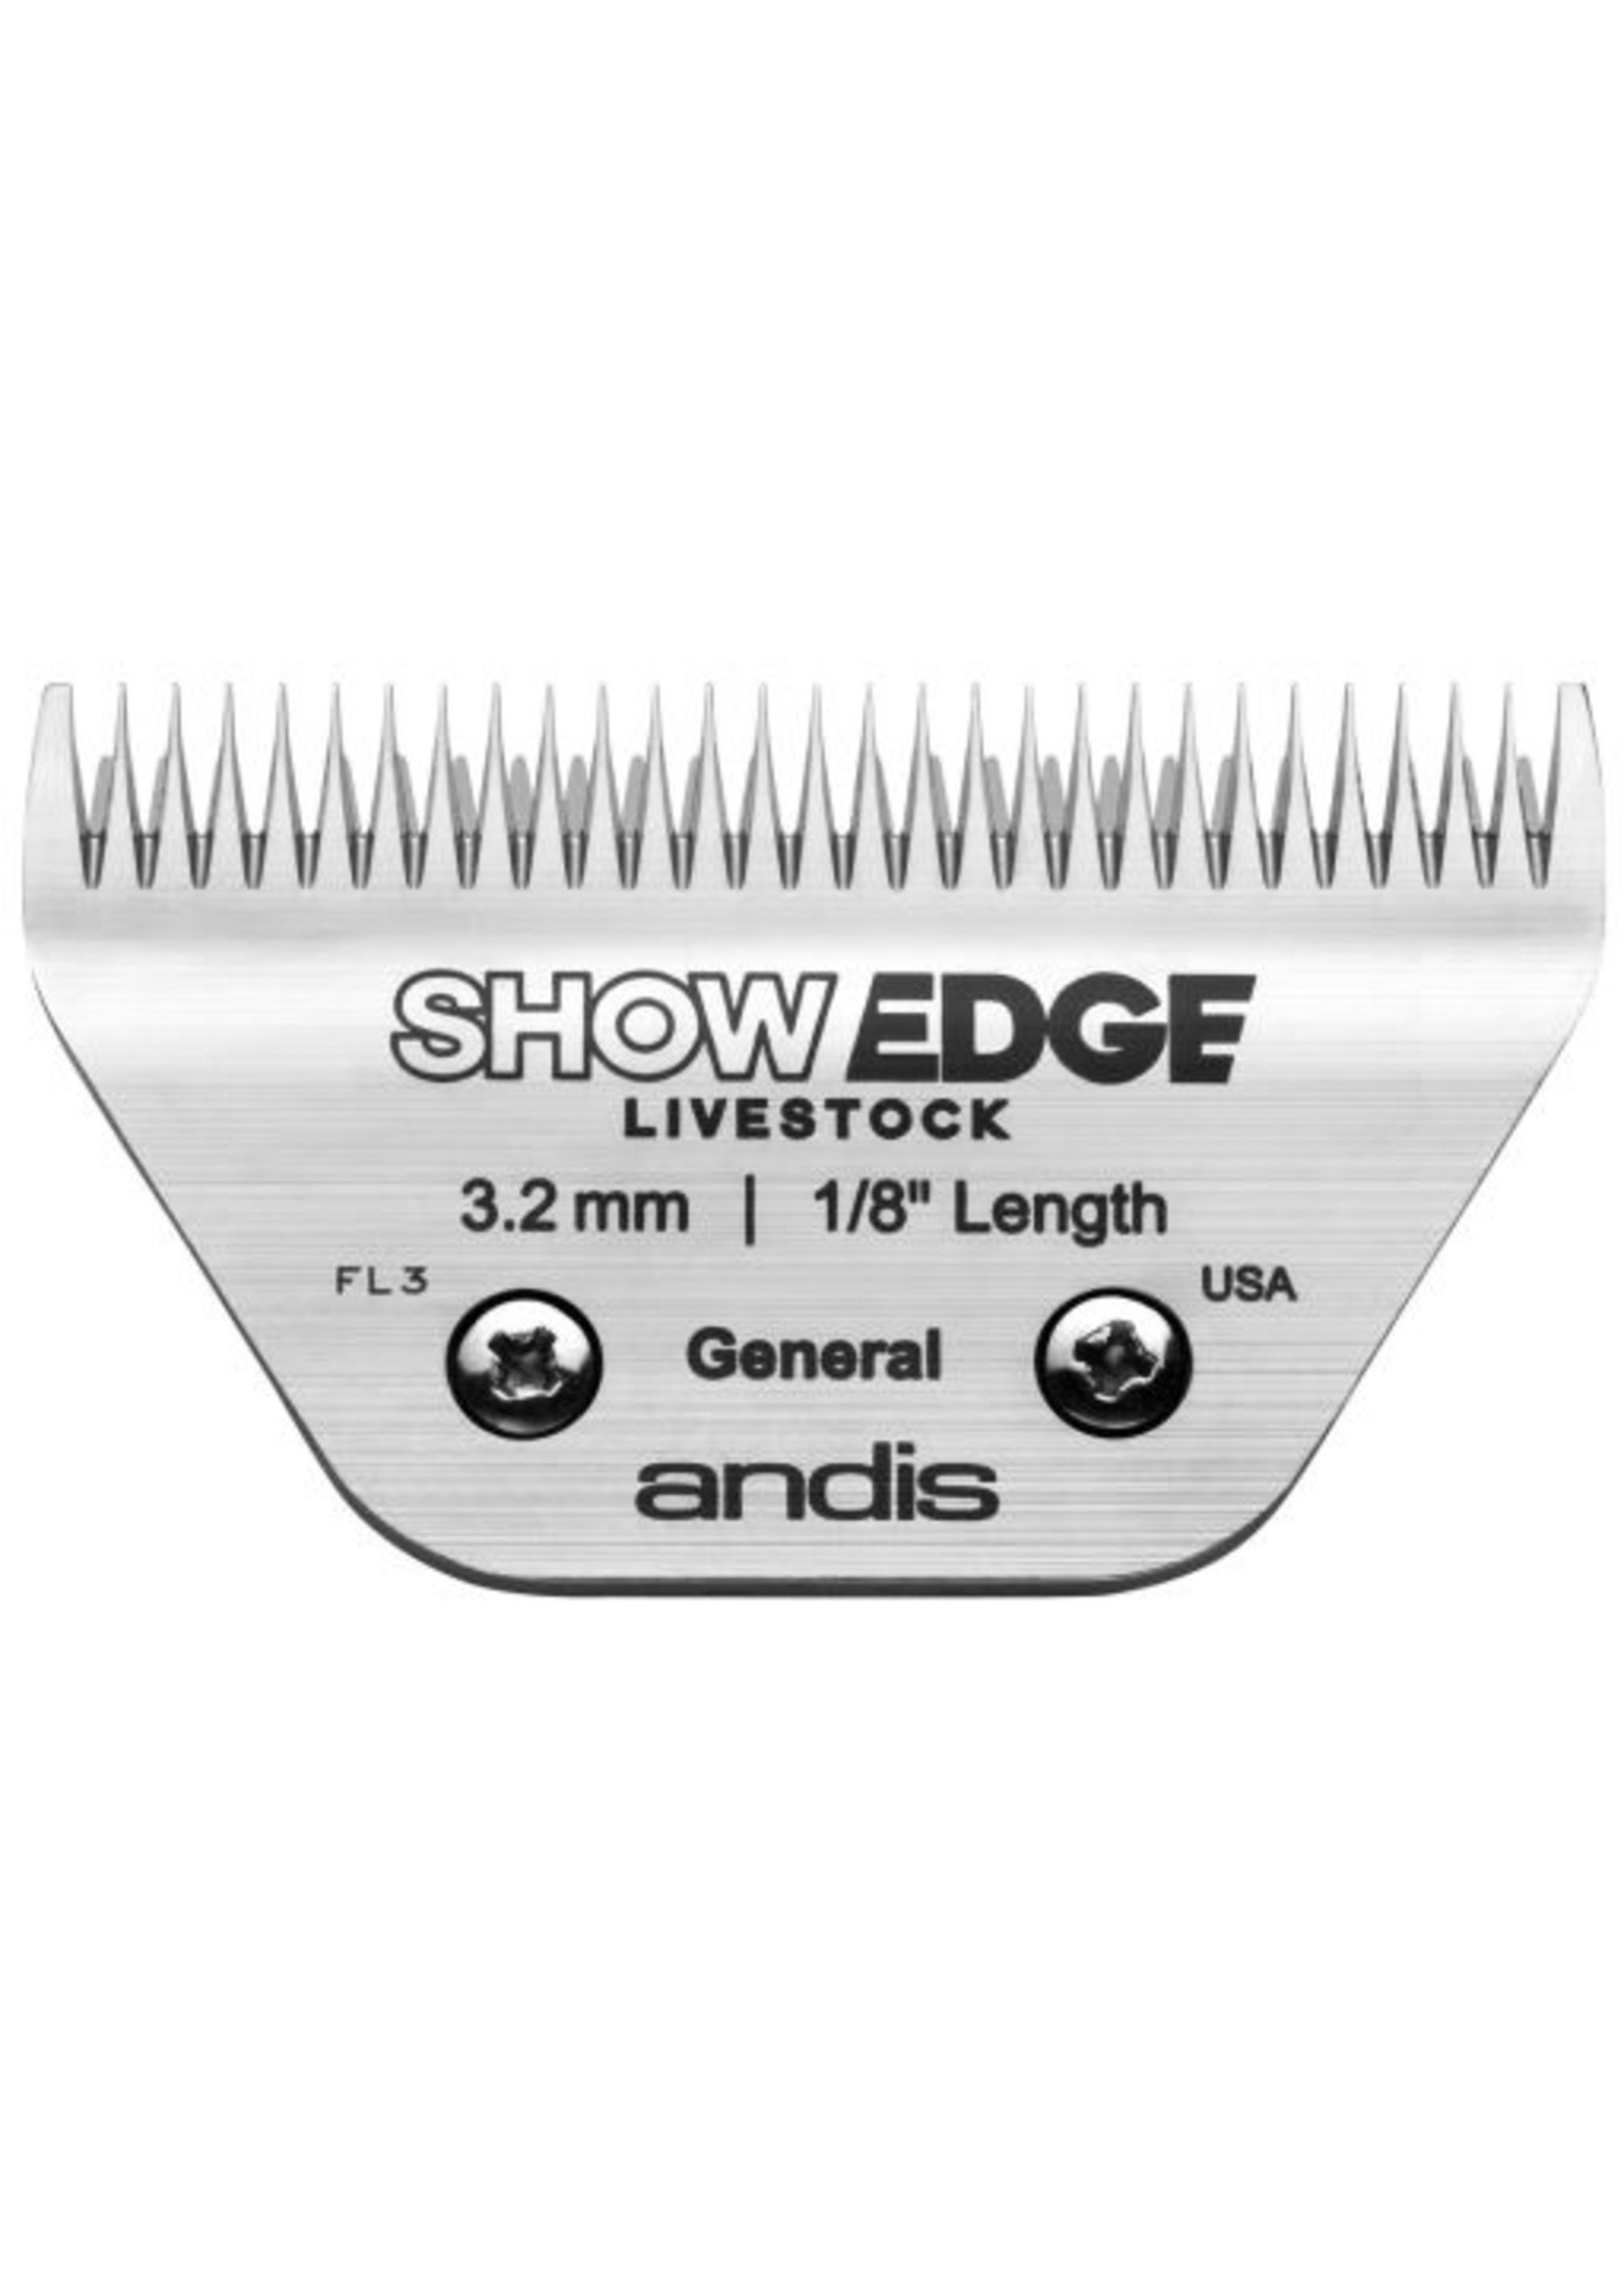 Andis Andis  Blade Show Edge Livestock General Size 3.2mm  1/8"